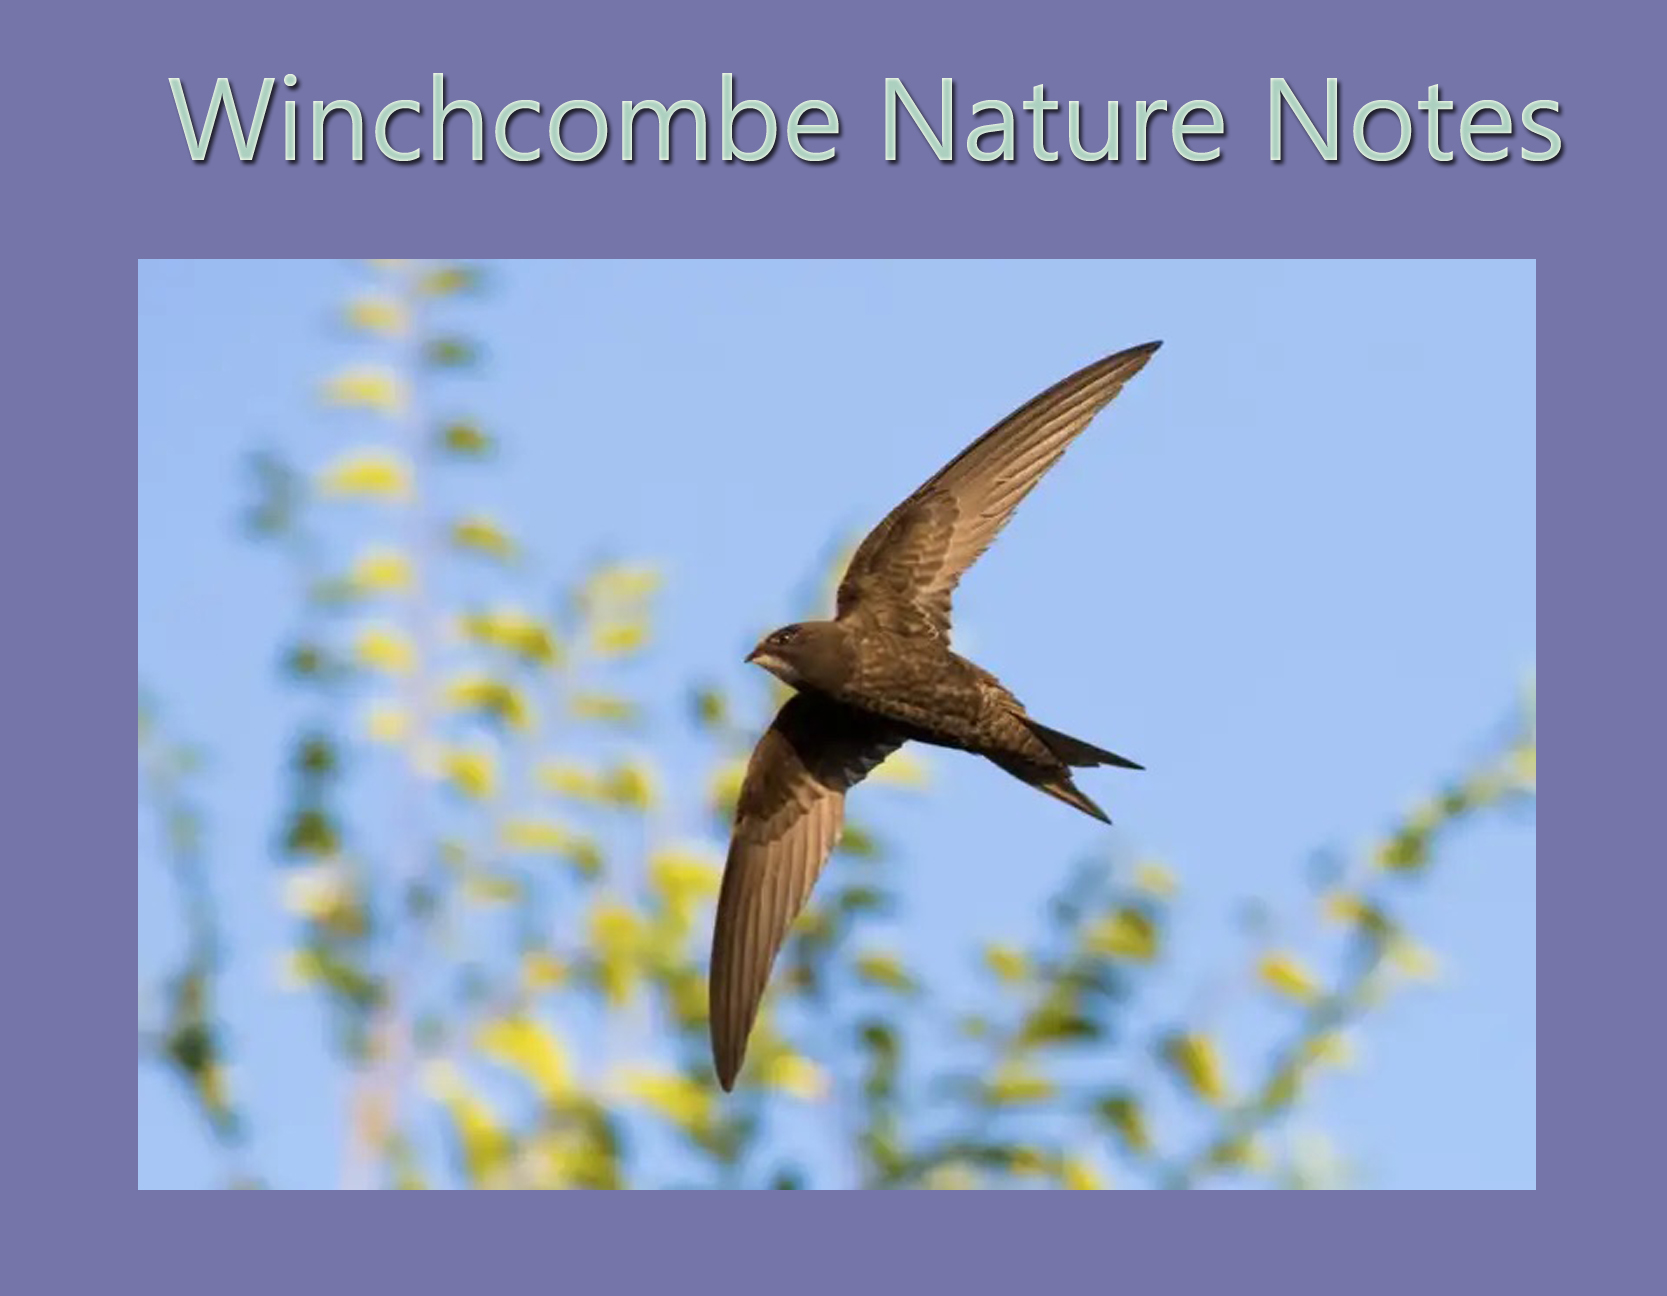 Winchcombe Nature Notes